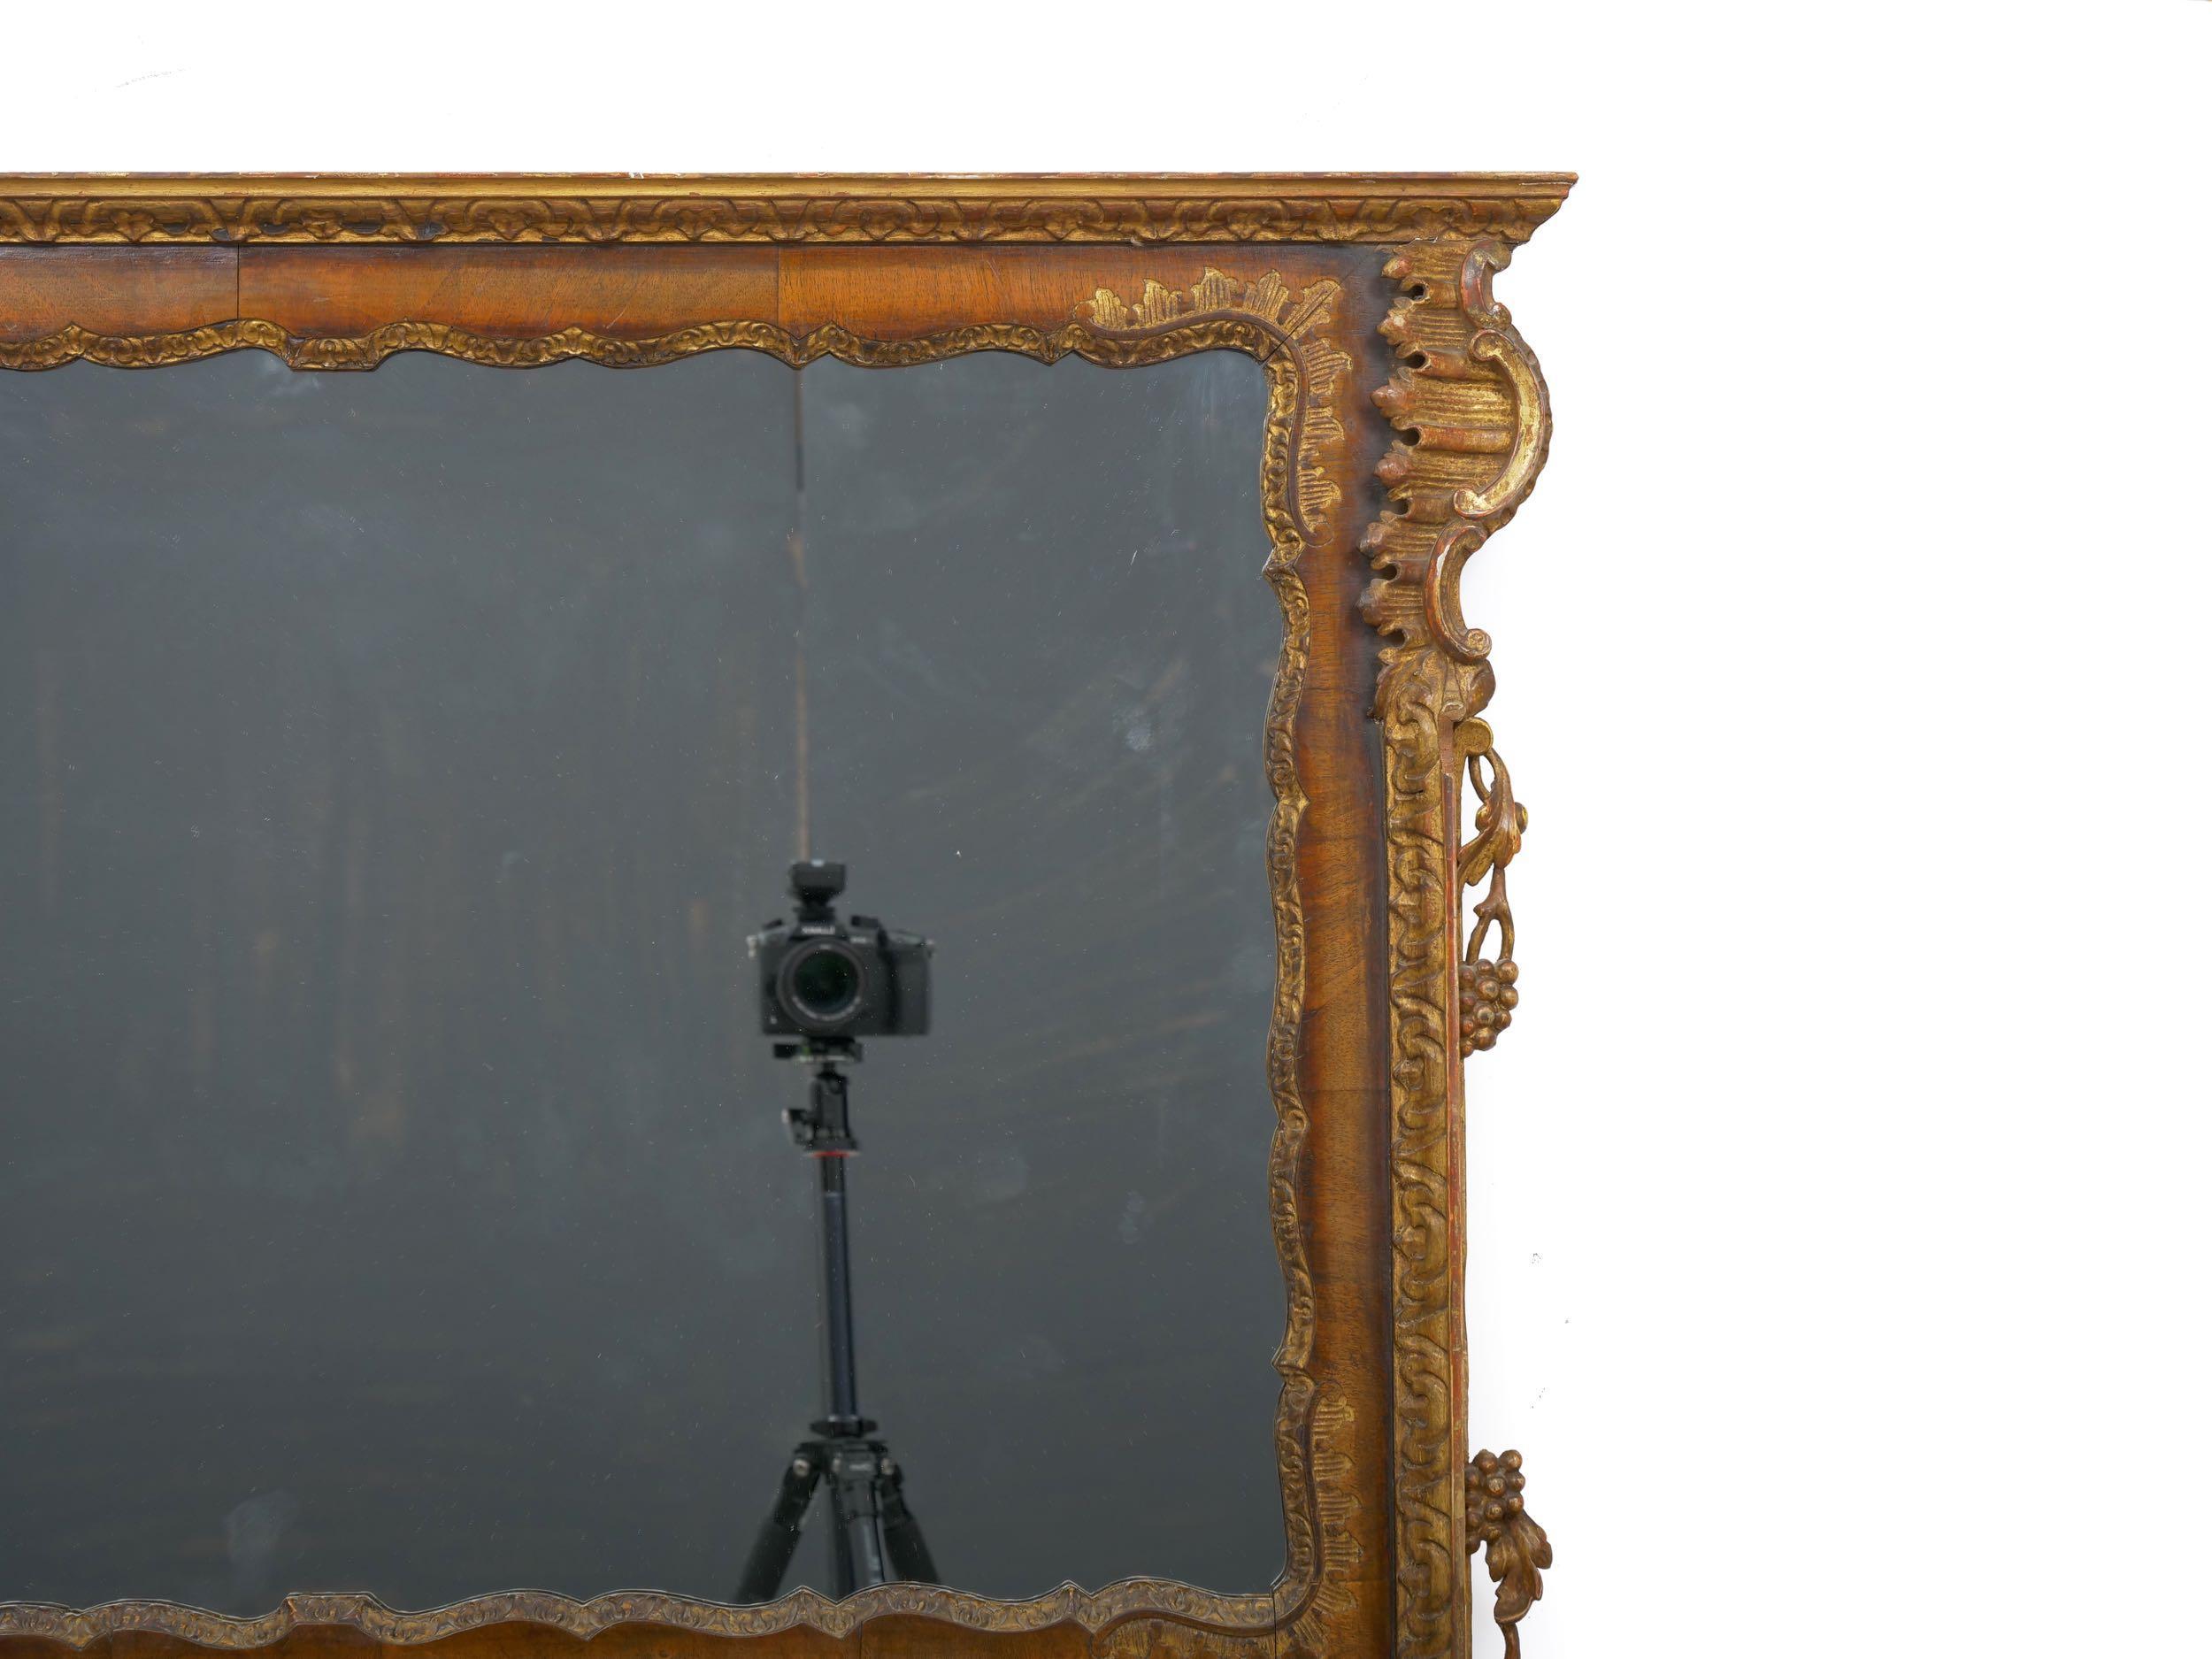 A gorgeous wall mirror from the mid-19th century, this originally housed a painting in the upper portion and the mirror in the lower portion. The painting has since been replaced with a modern piece of mirrored glass. It is crafted out of burlwood